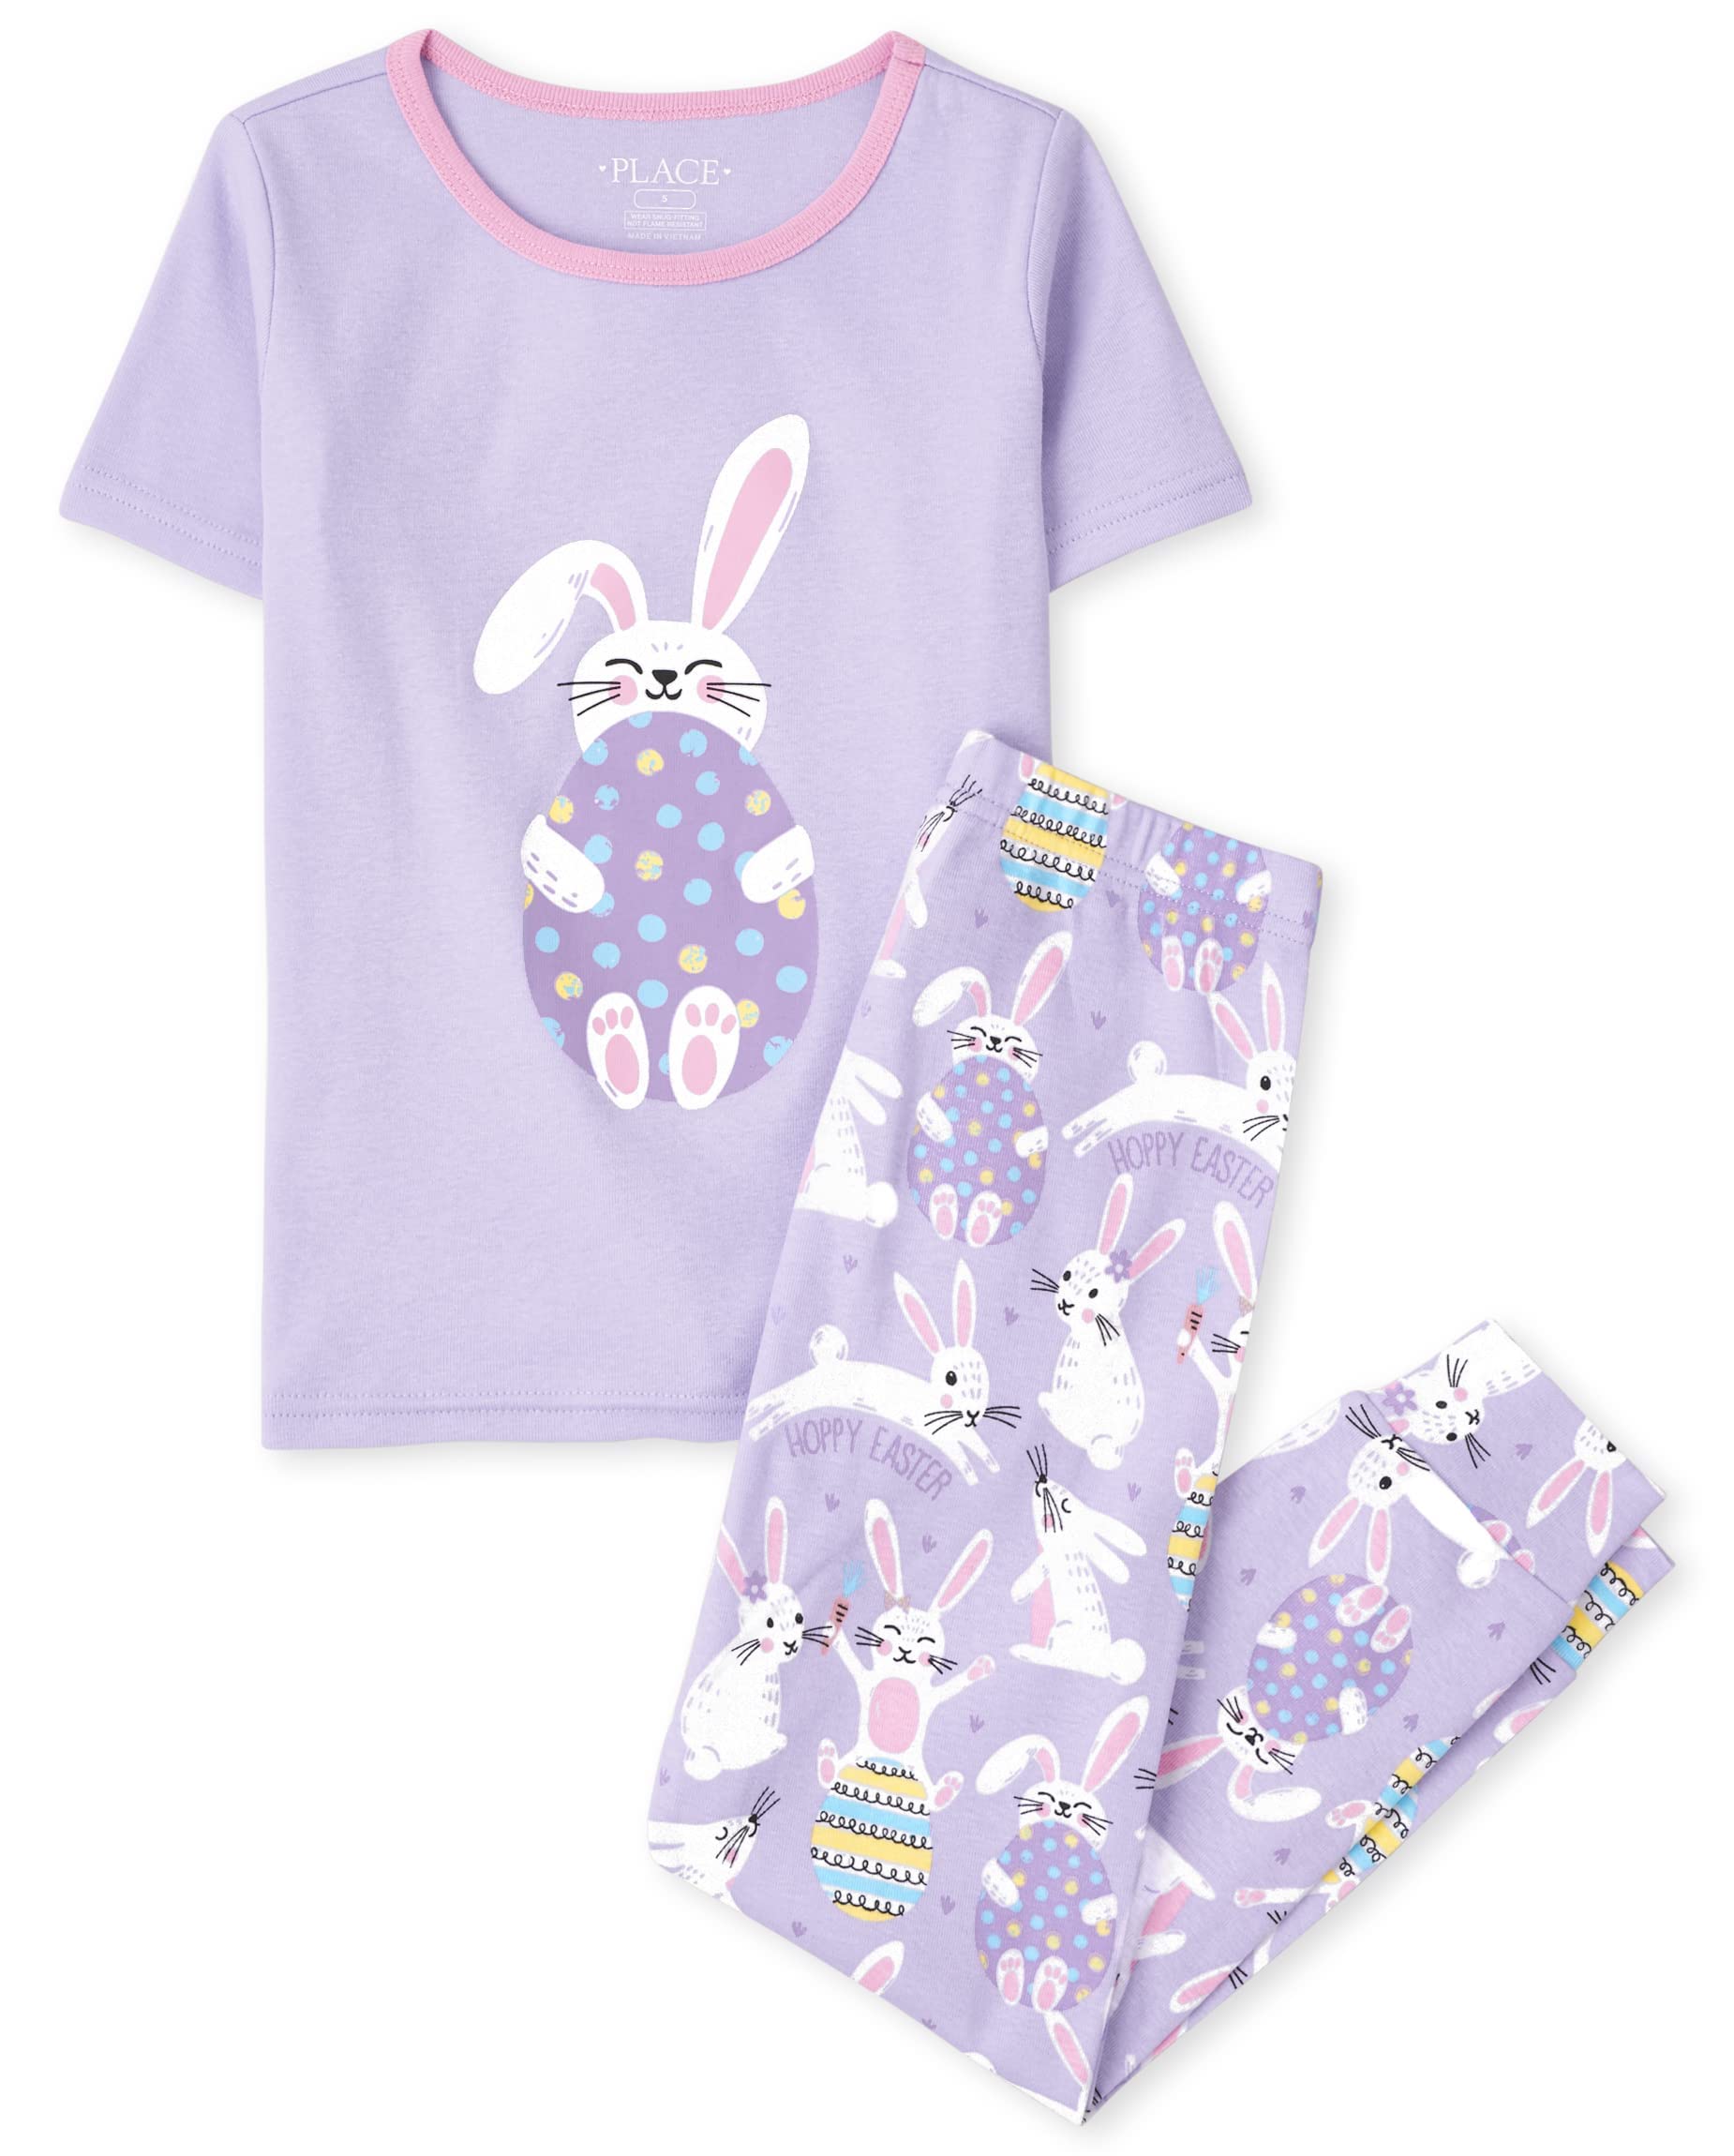 The Children's Place Girls' Short Sleeve Top and Pants Pajama Set